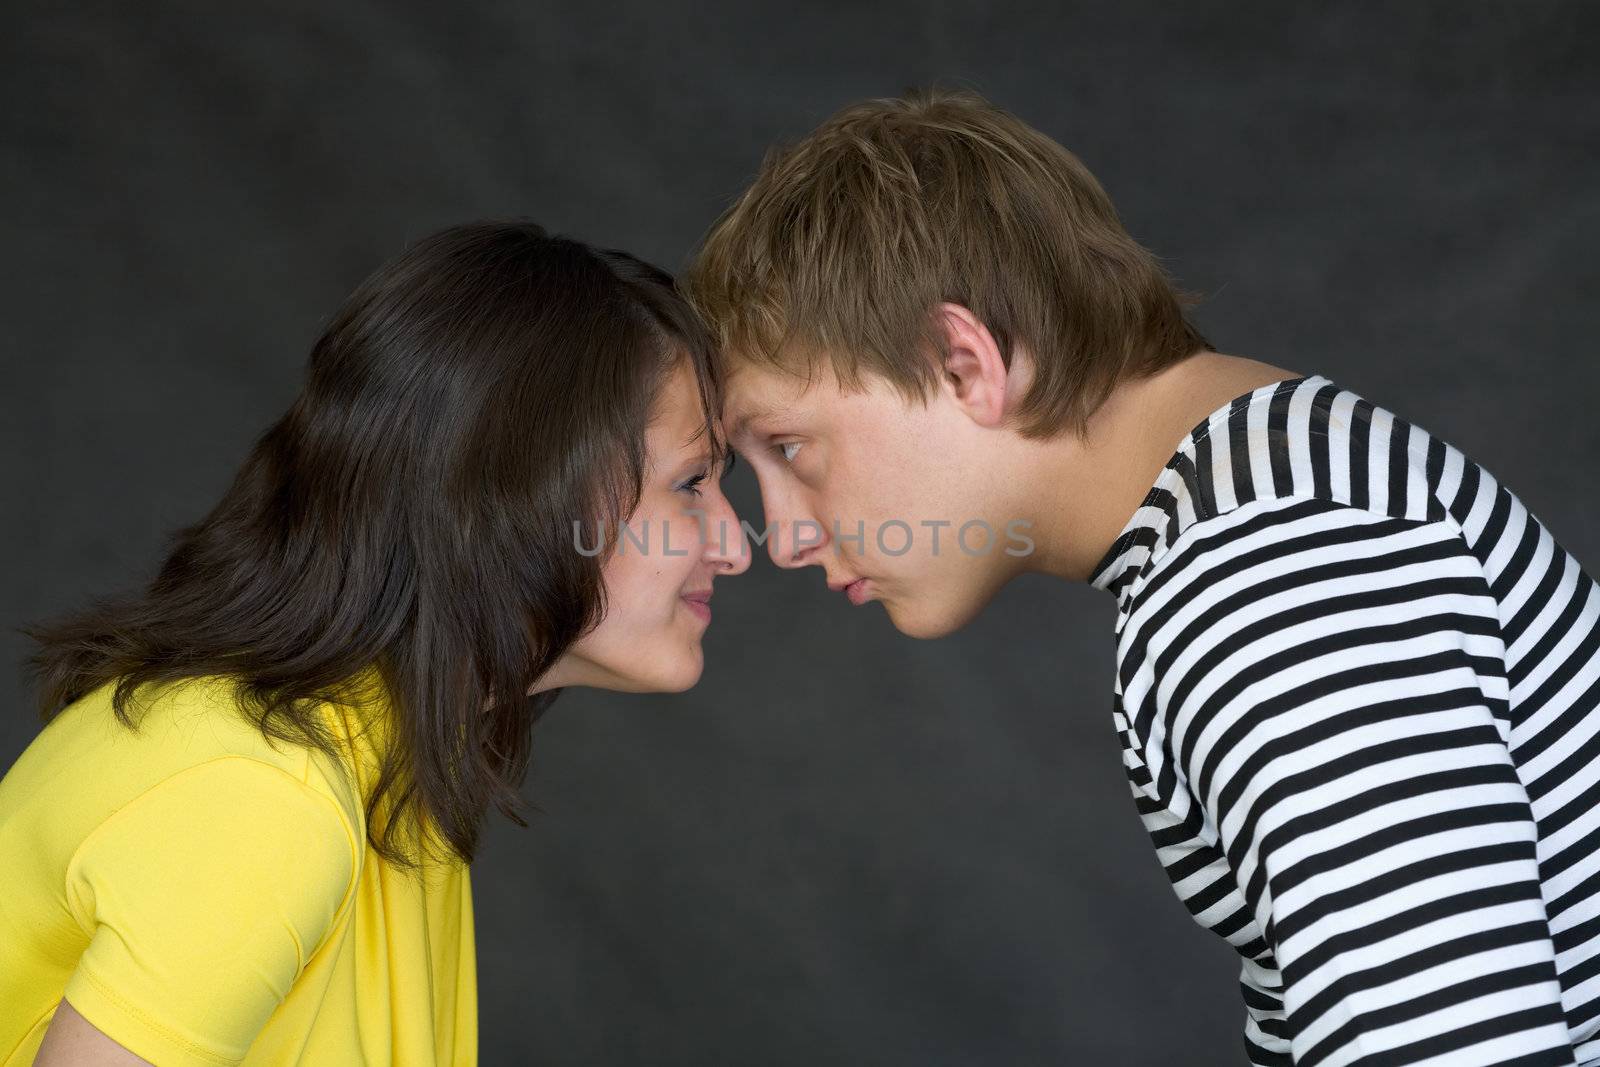 Guy and the girl have faced foreheads on a black background